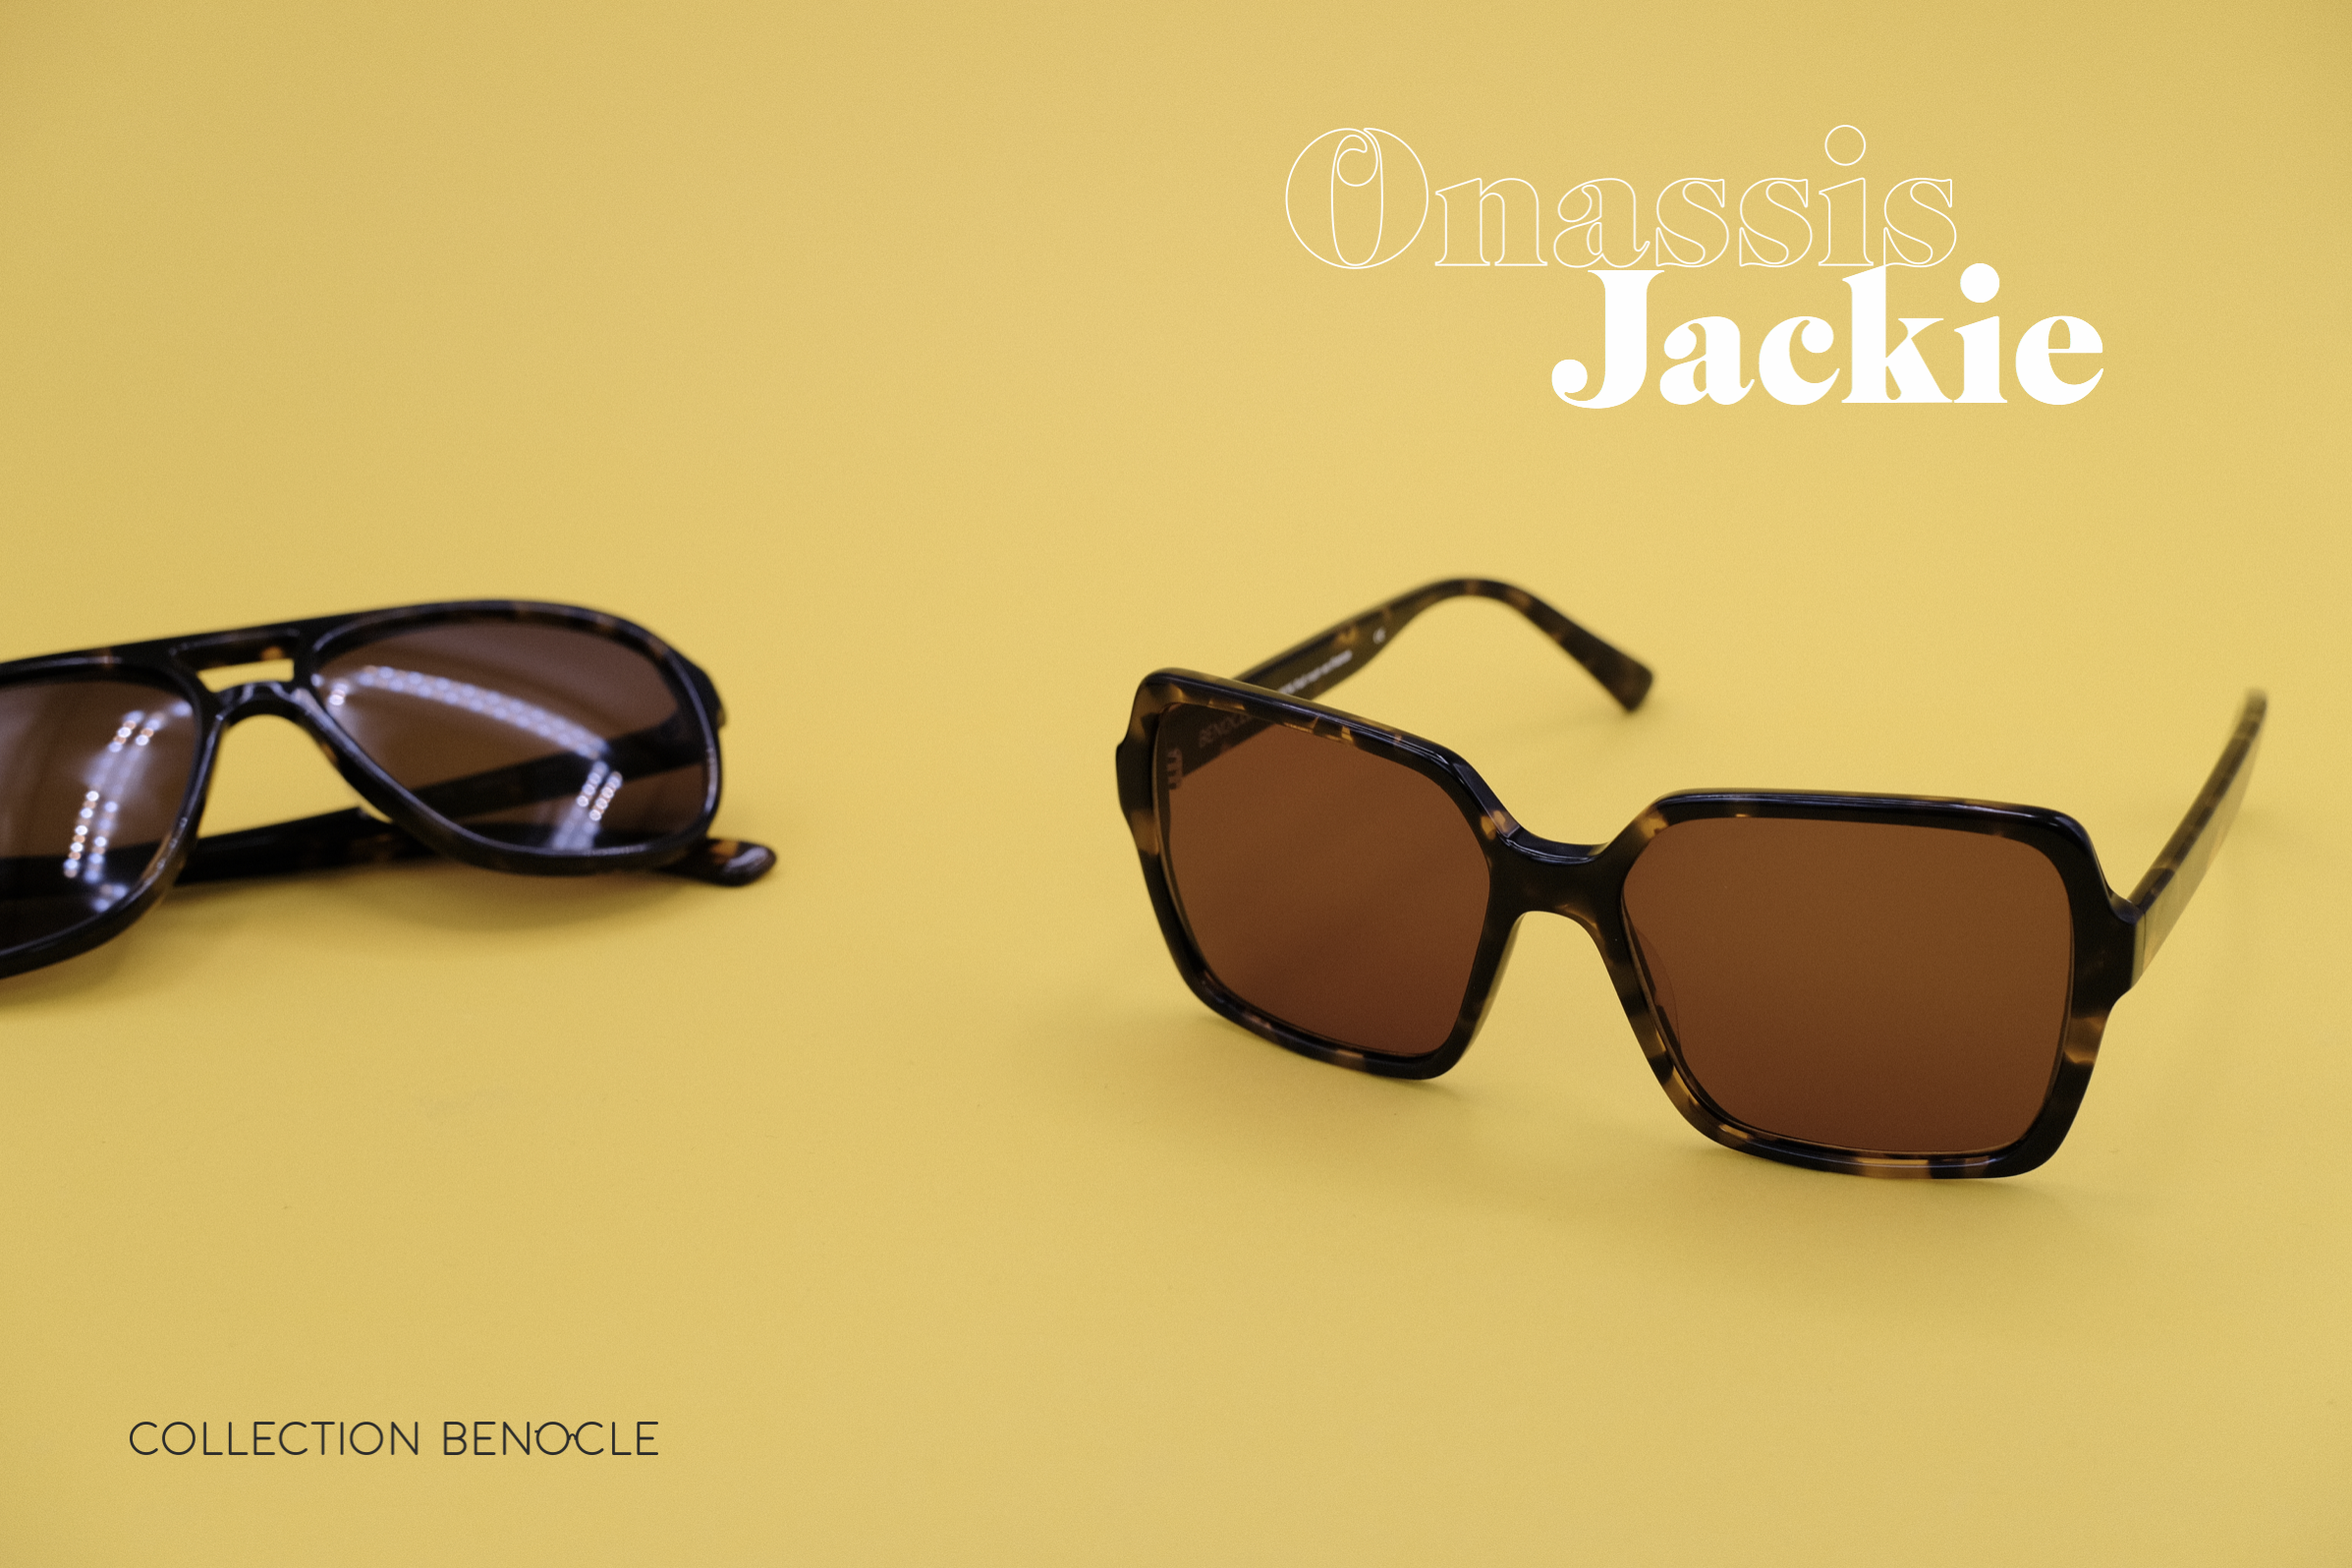 solaires collection benocle